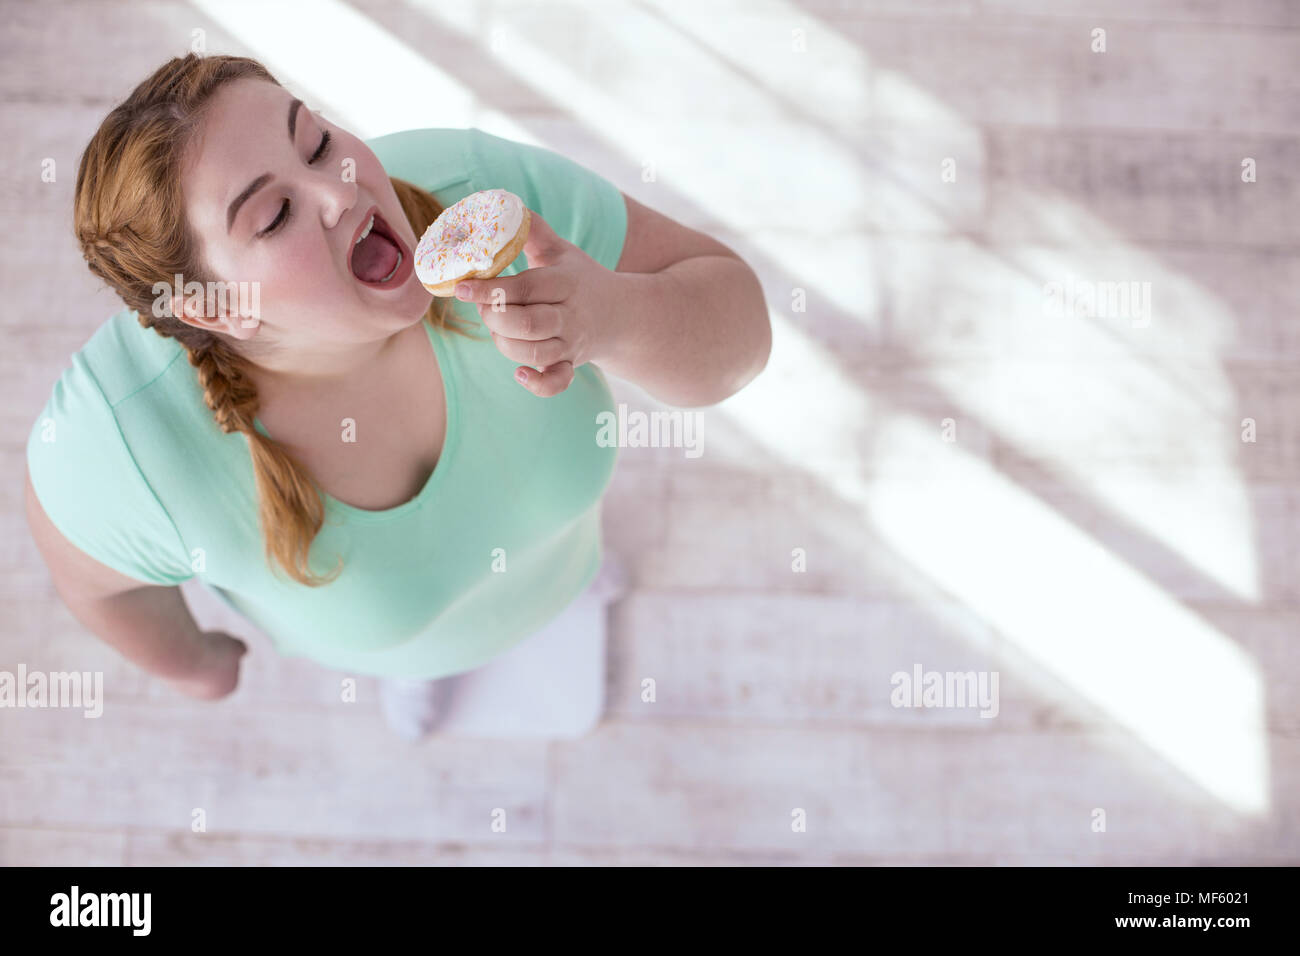 Plump young woman seduced by sweets Stock Photo